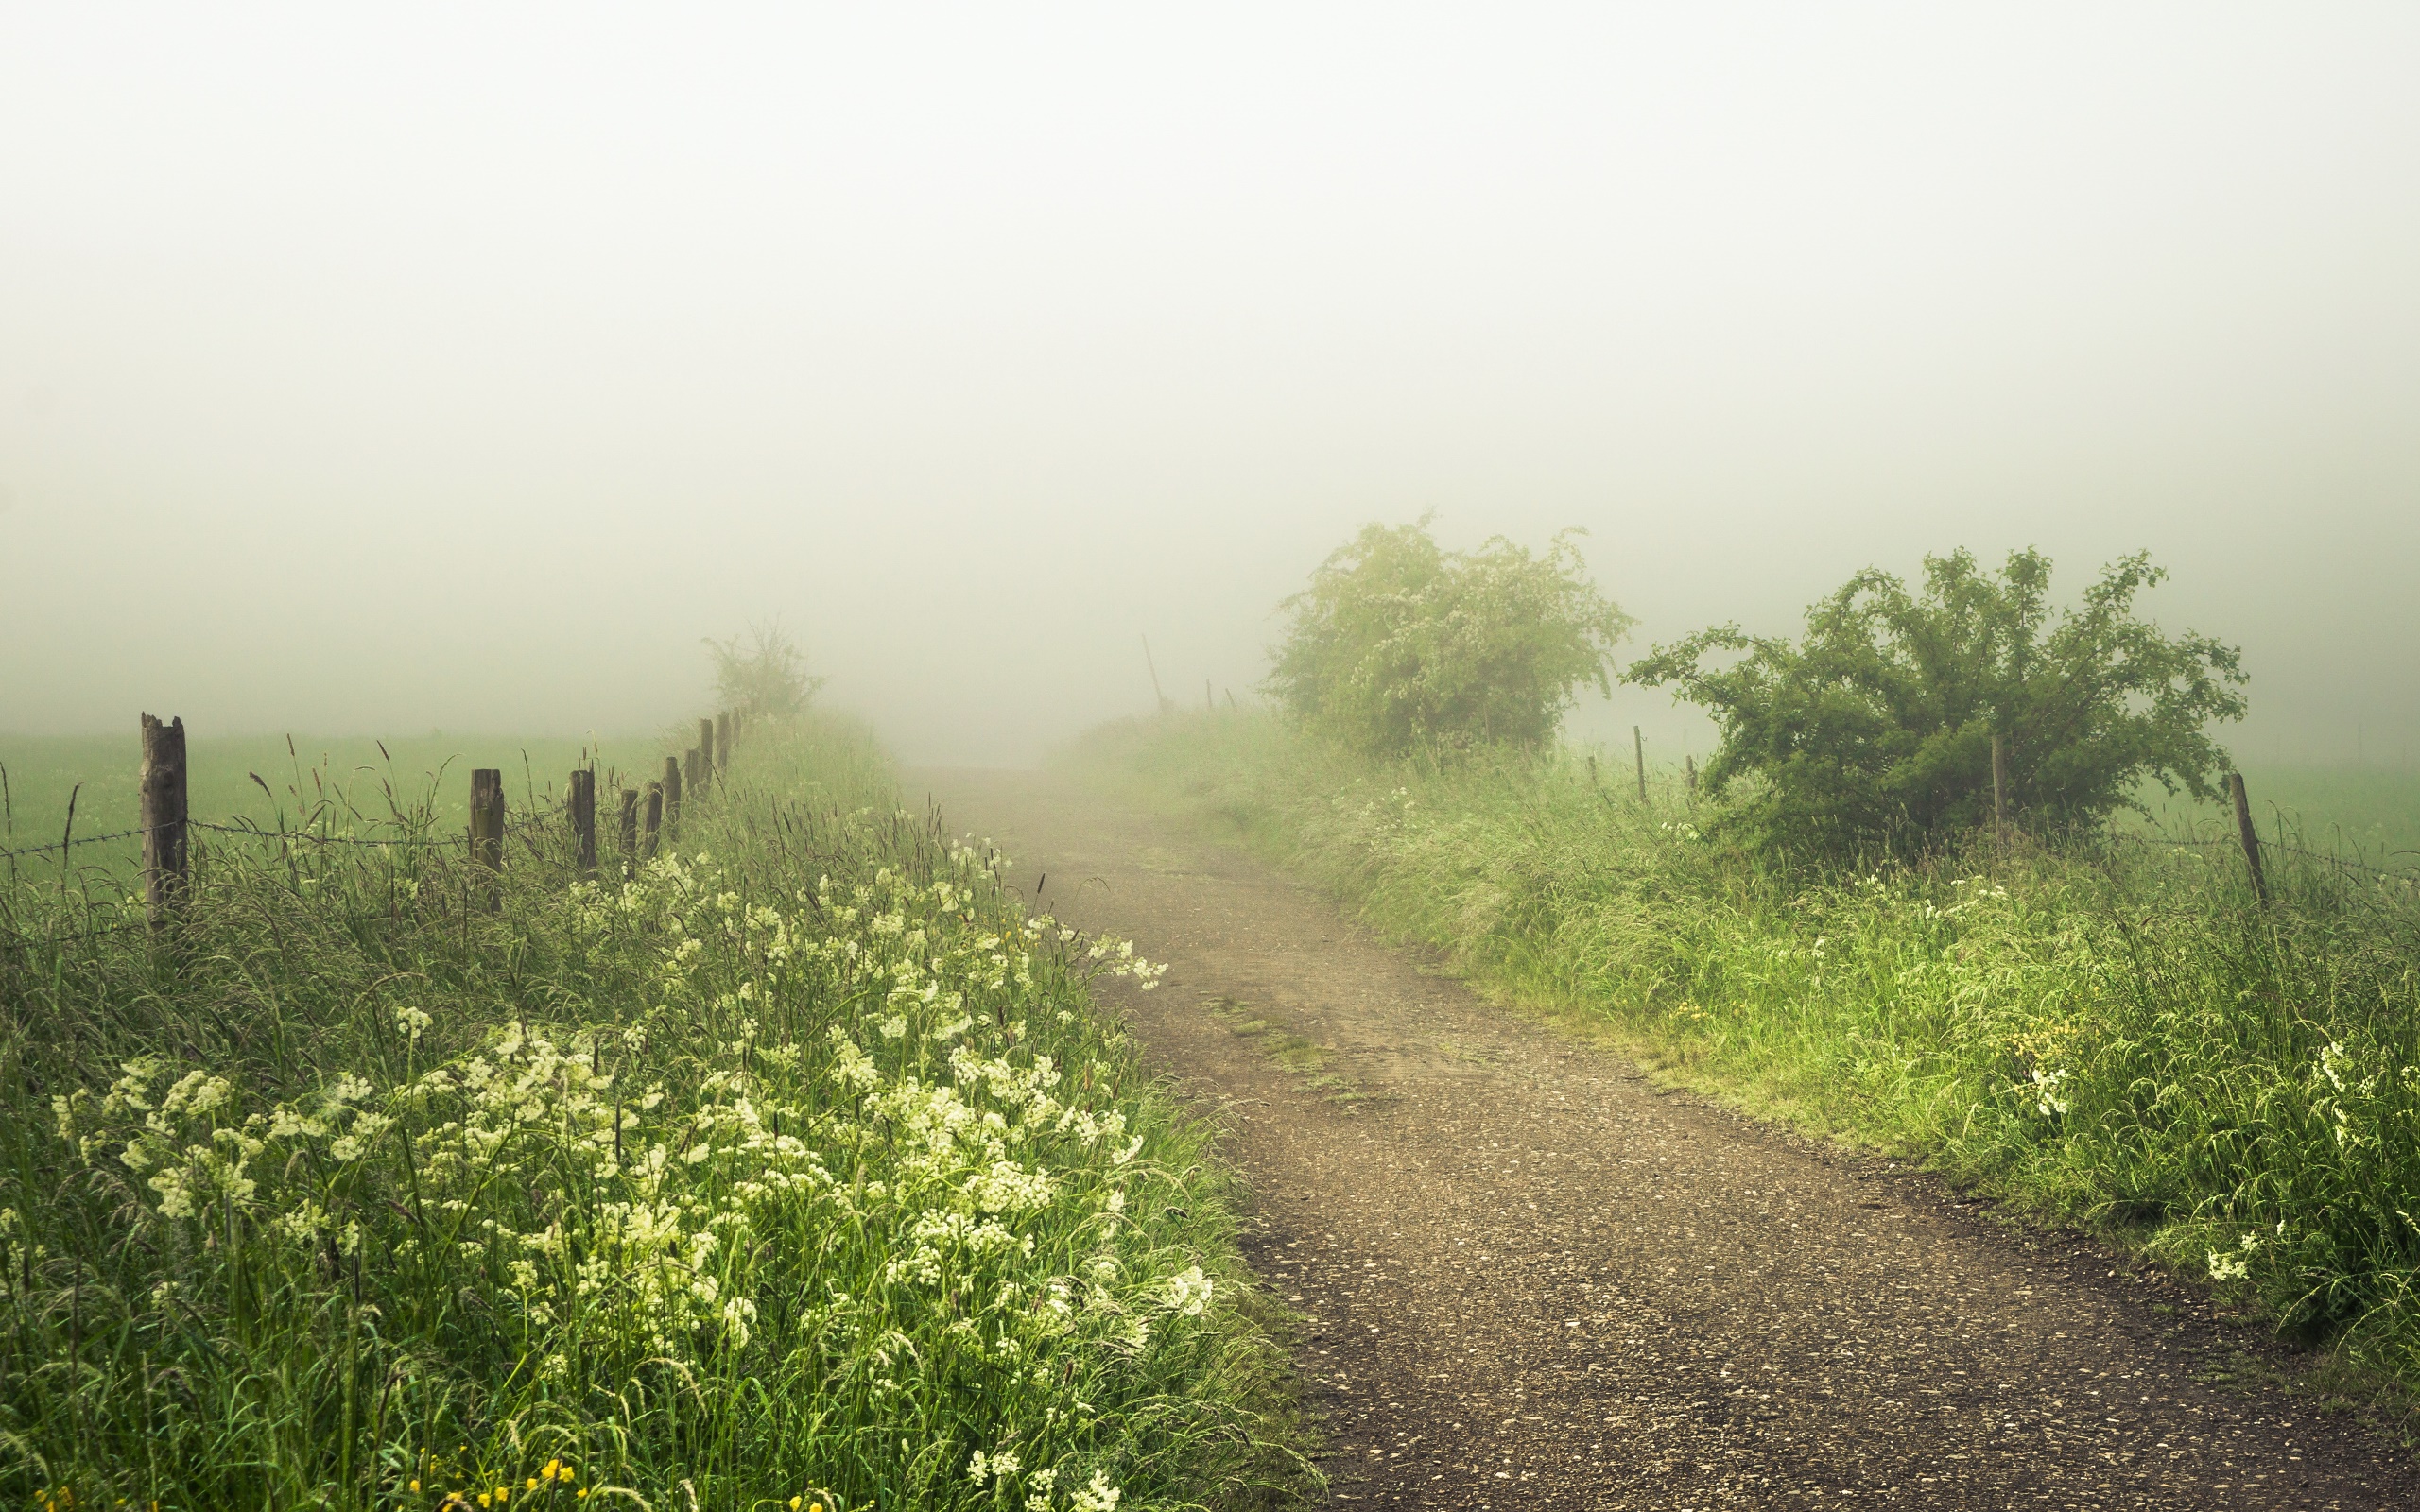 General 2560x1600 plants mist outdoors dirt road fence